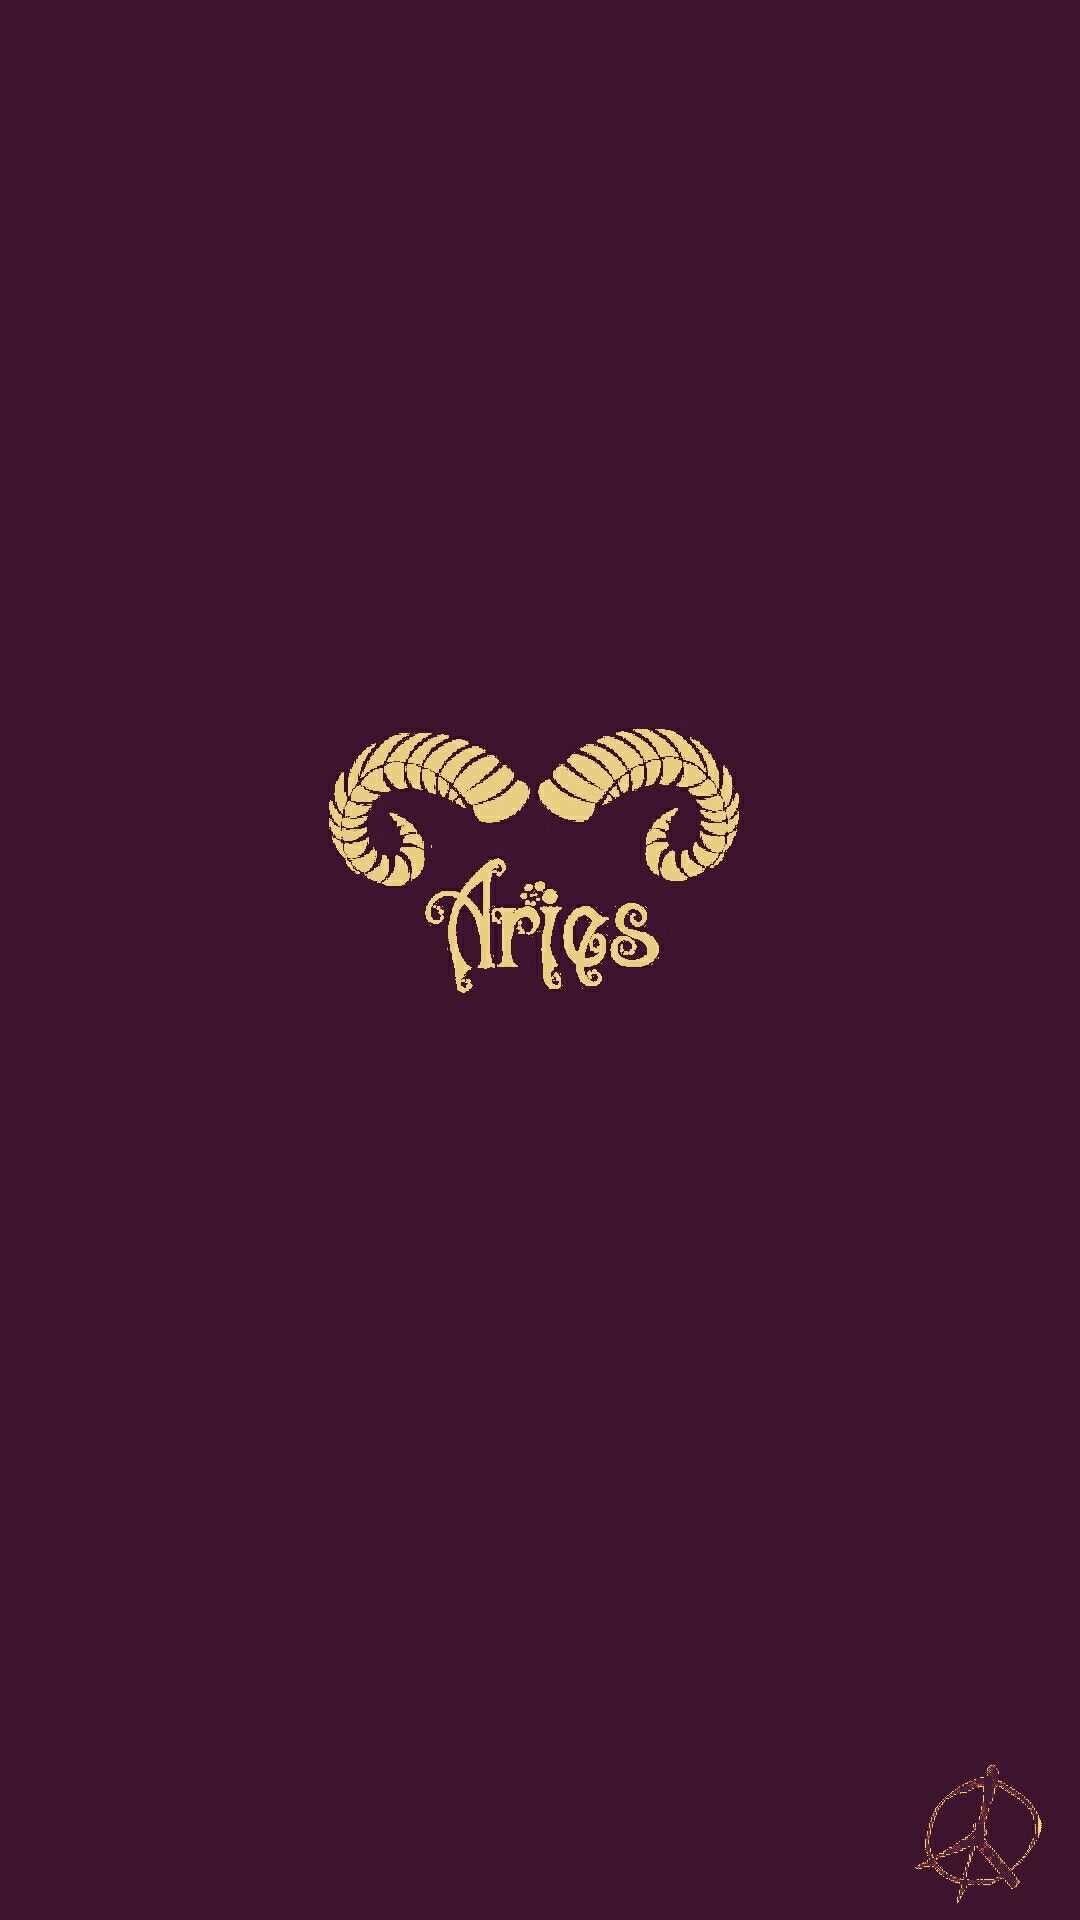 Aries Iphone Wallpaper Kolpaper Awesome Free Hd Wallpapers